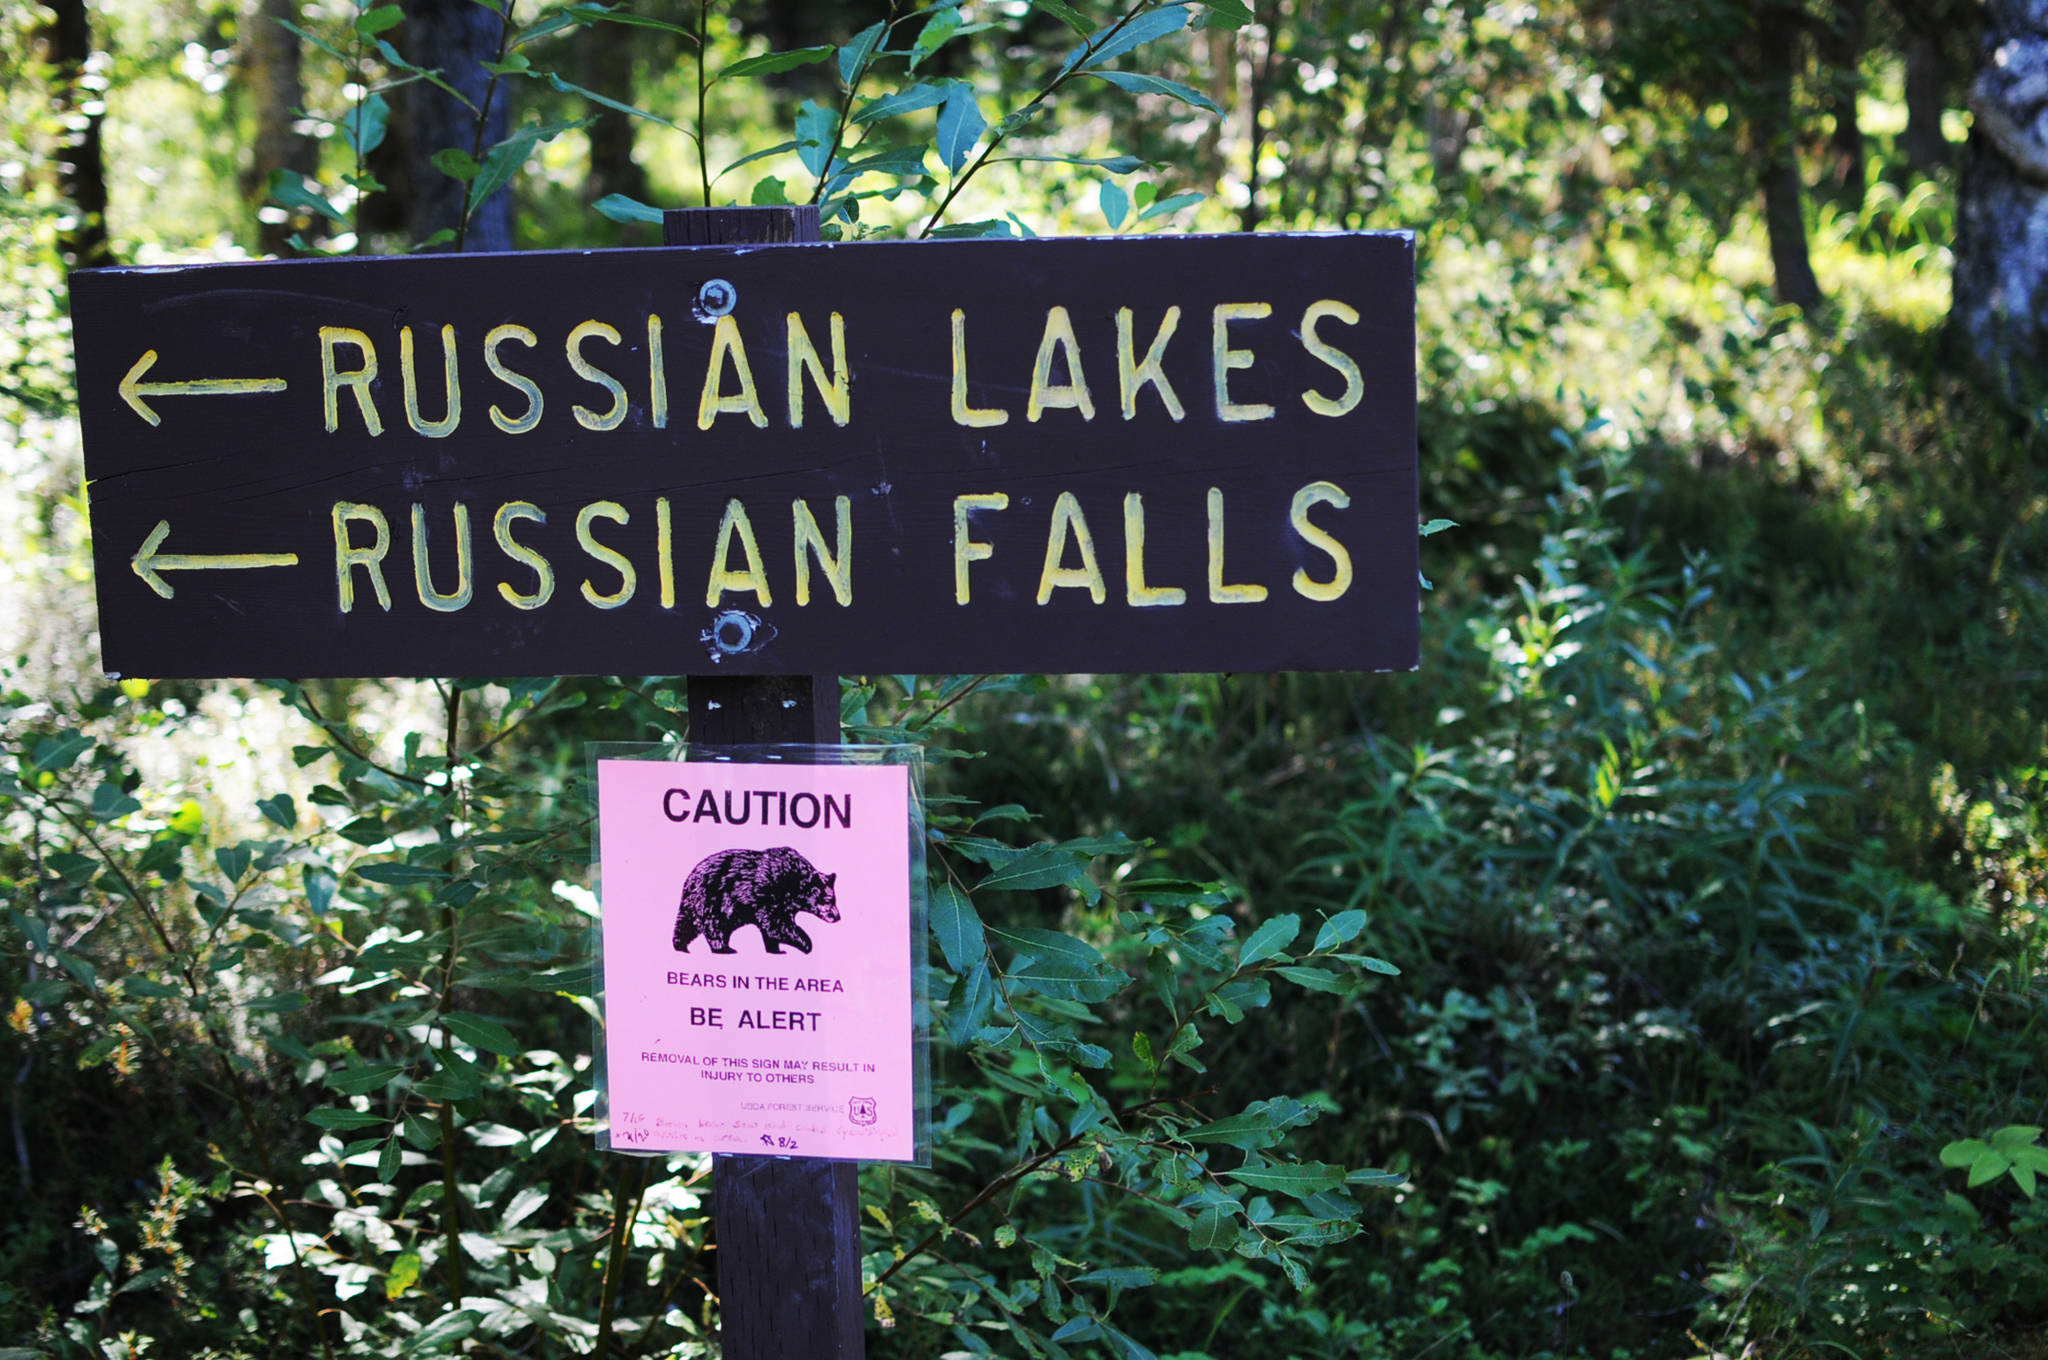 A sign warns visitors about a recent bear sighting near the Russian River on Sunday, Aug. 6, 2017 near Cooper Landing, Alaska. Bears frequent the area, a highly productive sockeye salmon fishery and one of the most popular sportfisheries in the state. (Photo by Elizabeth Earl/Peninsula Clarion)